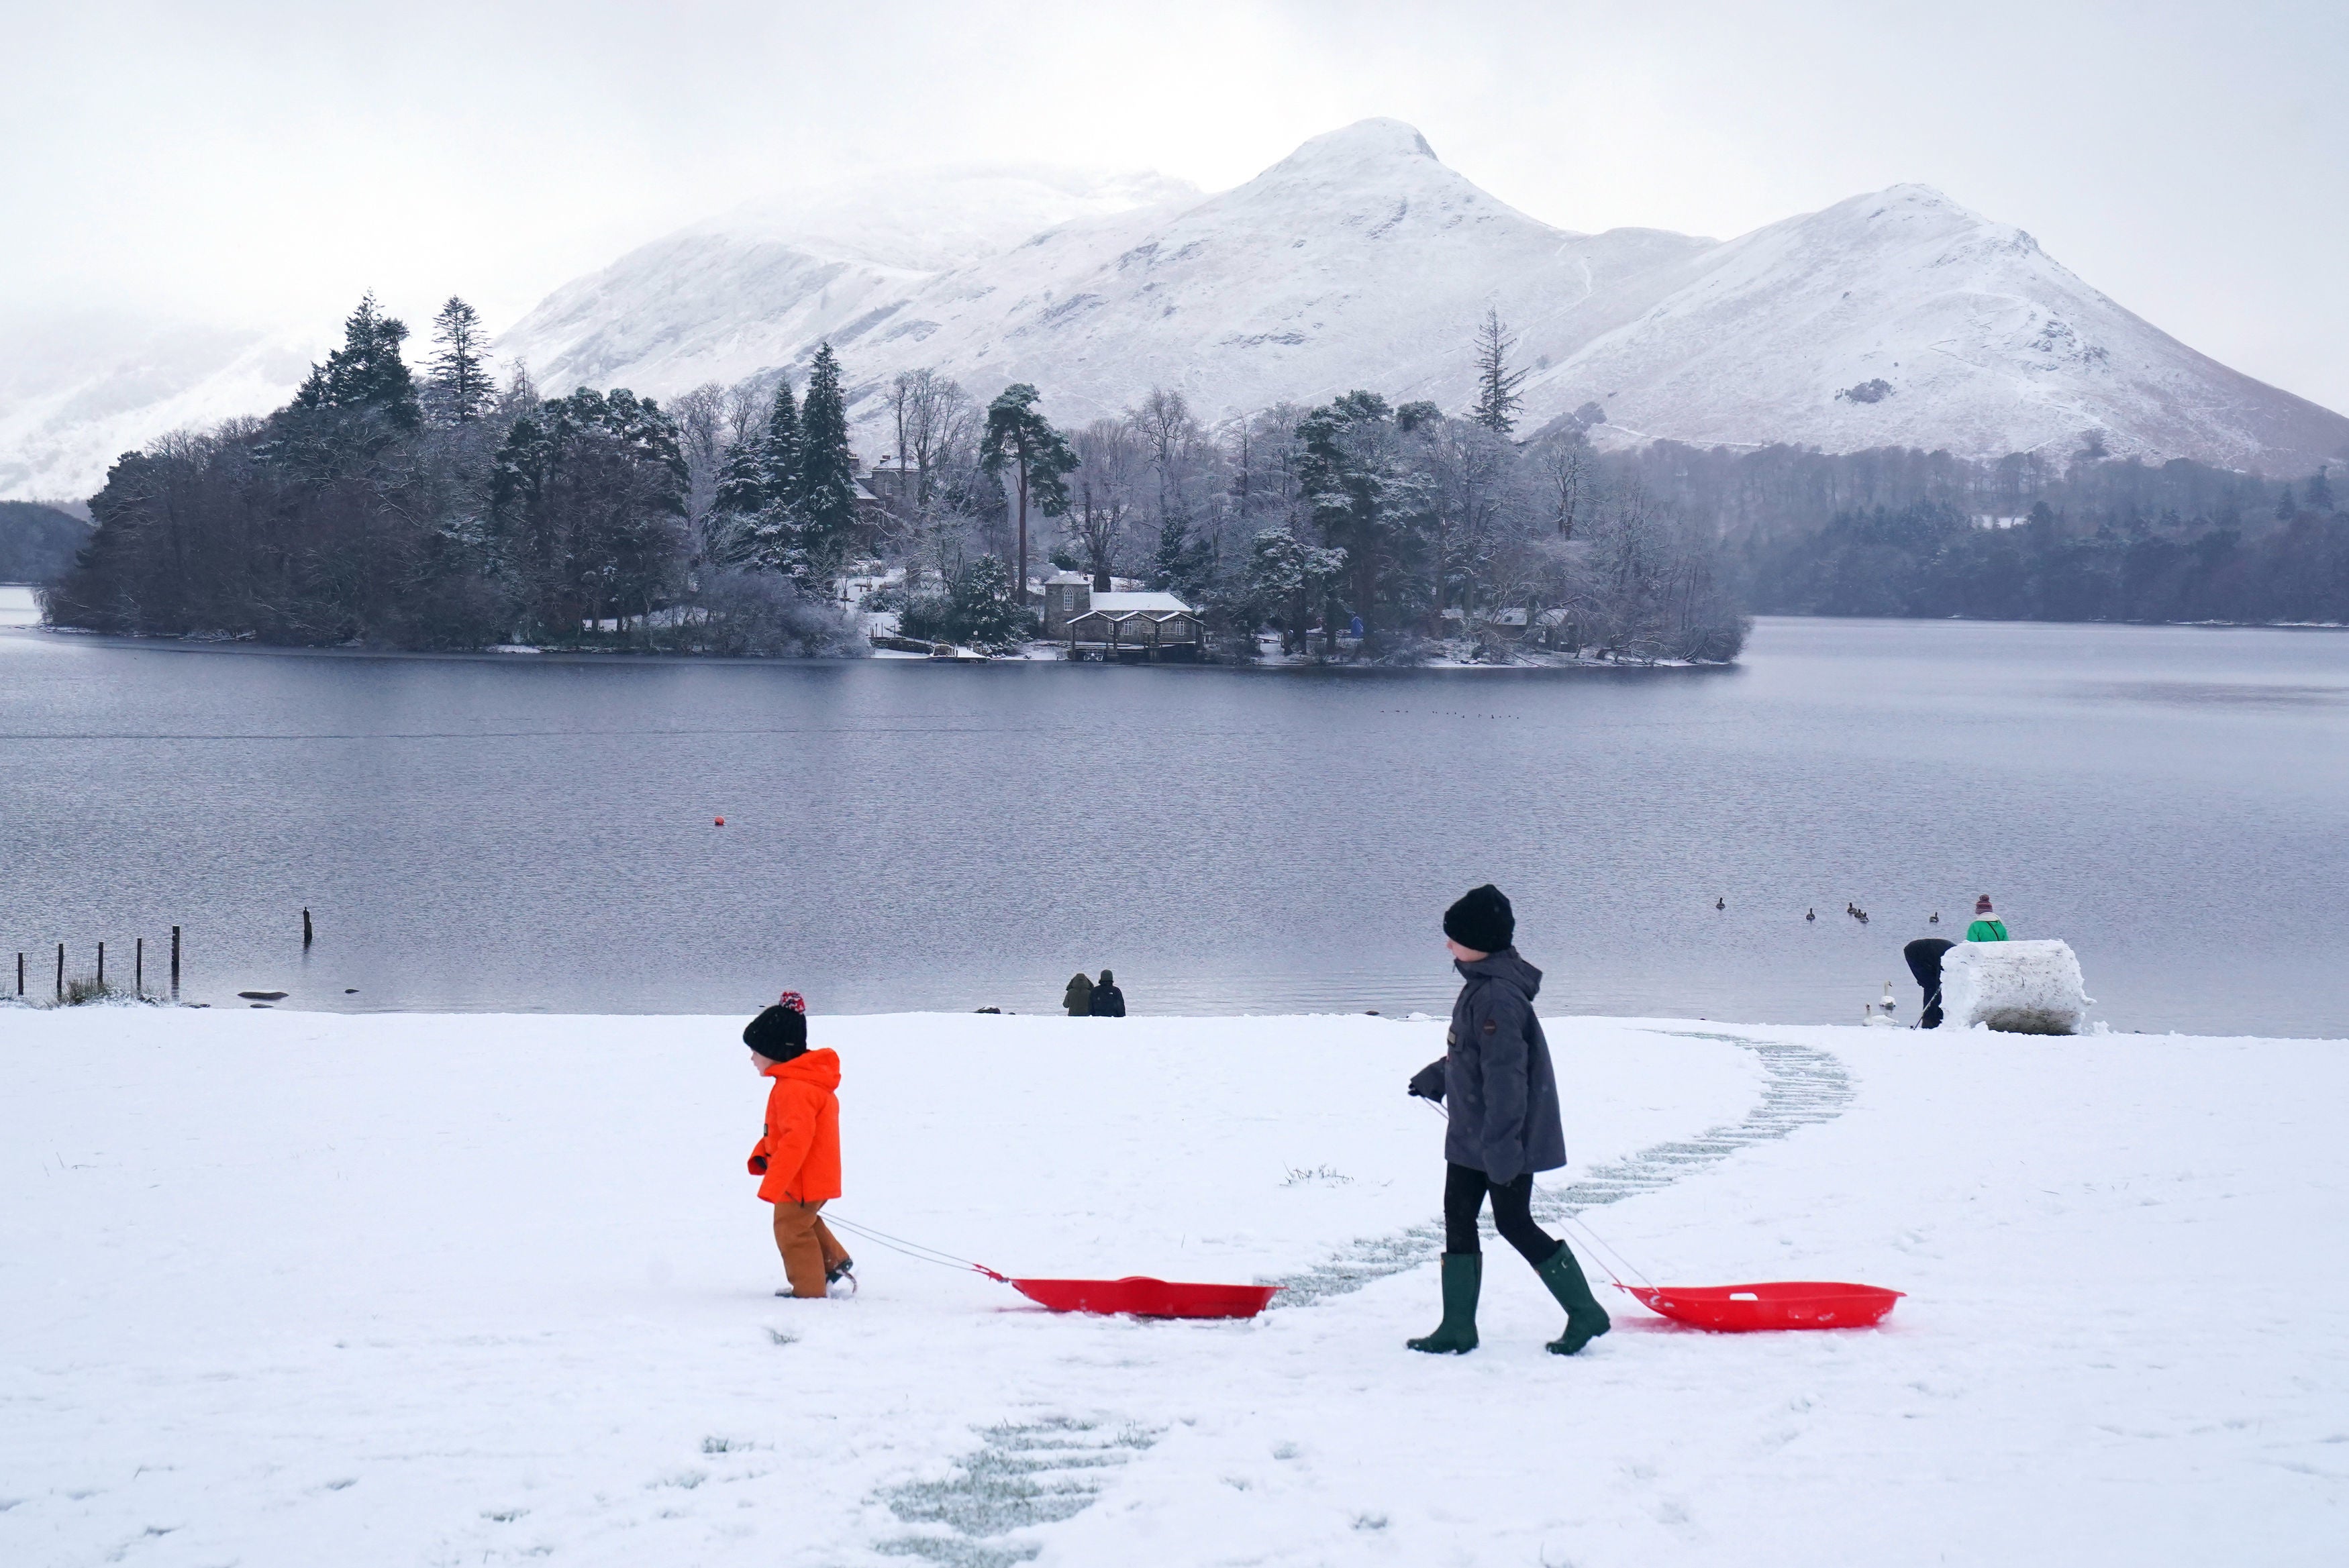 People pulling sledges in snowy conditions in Crow Park at Derwent Water near Keswick, Cumbria